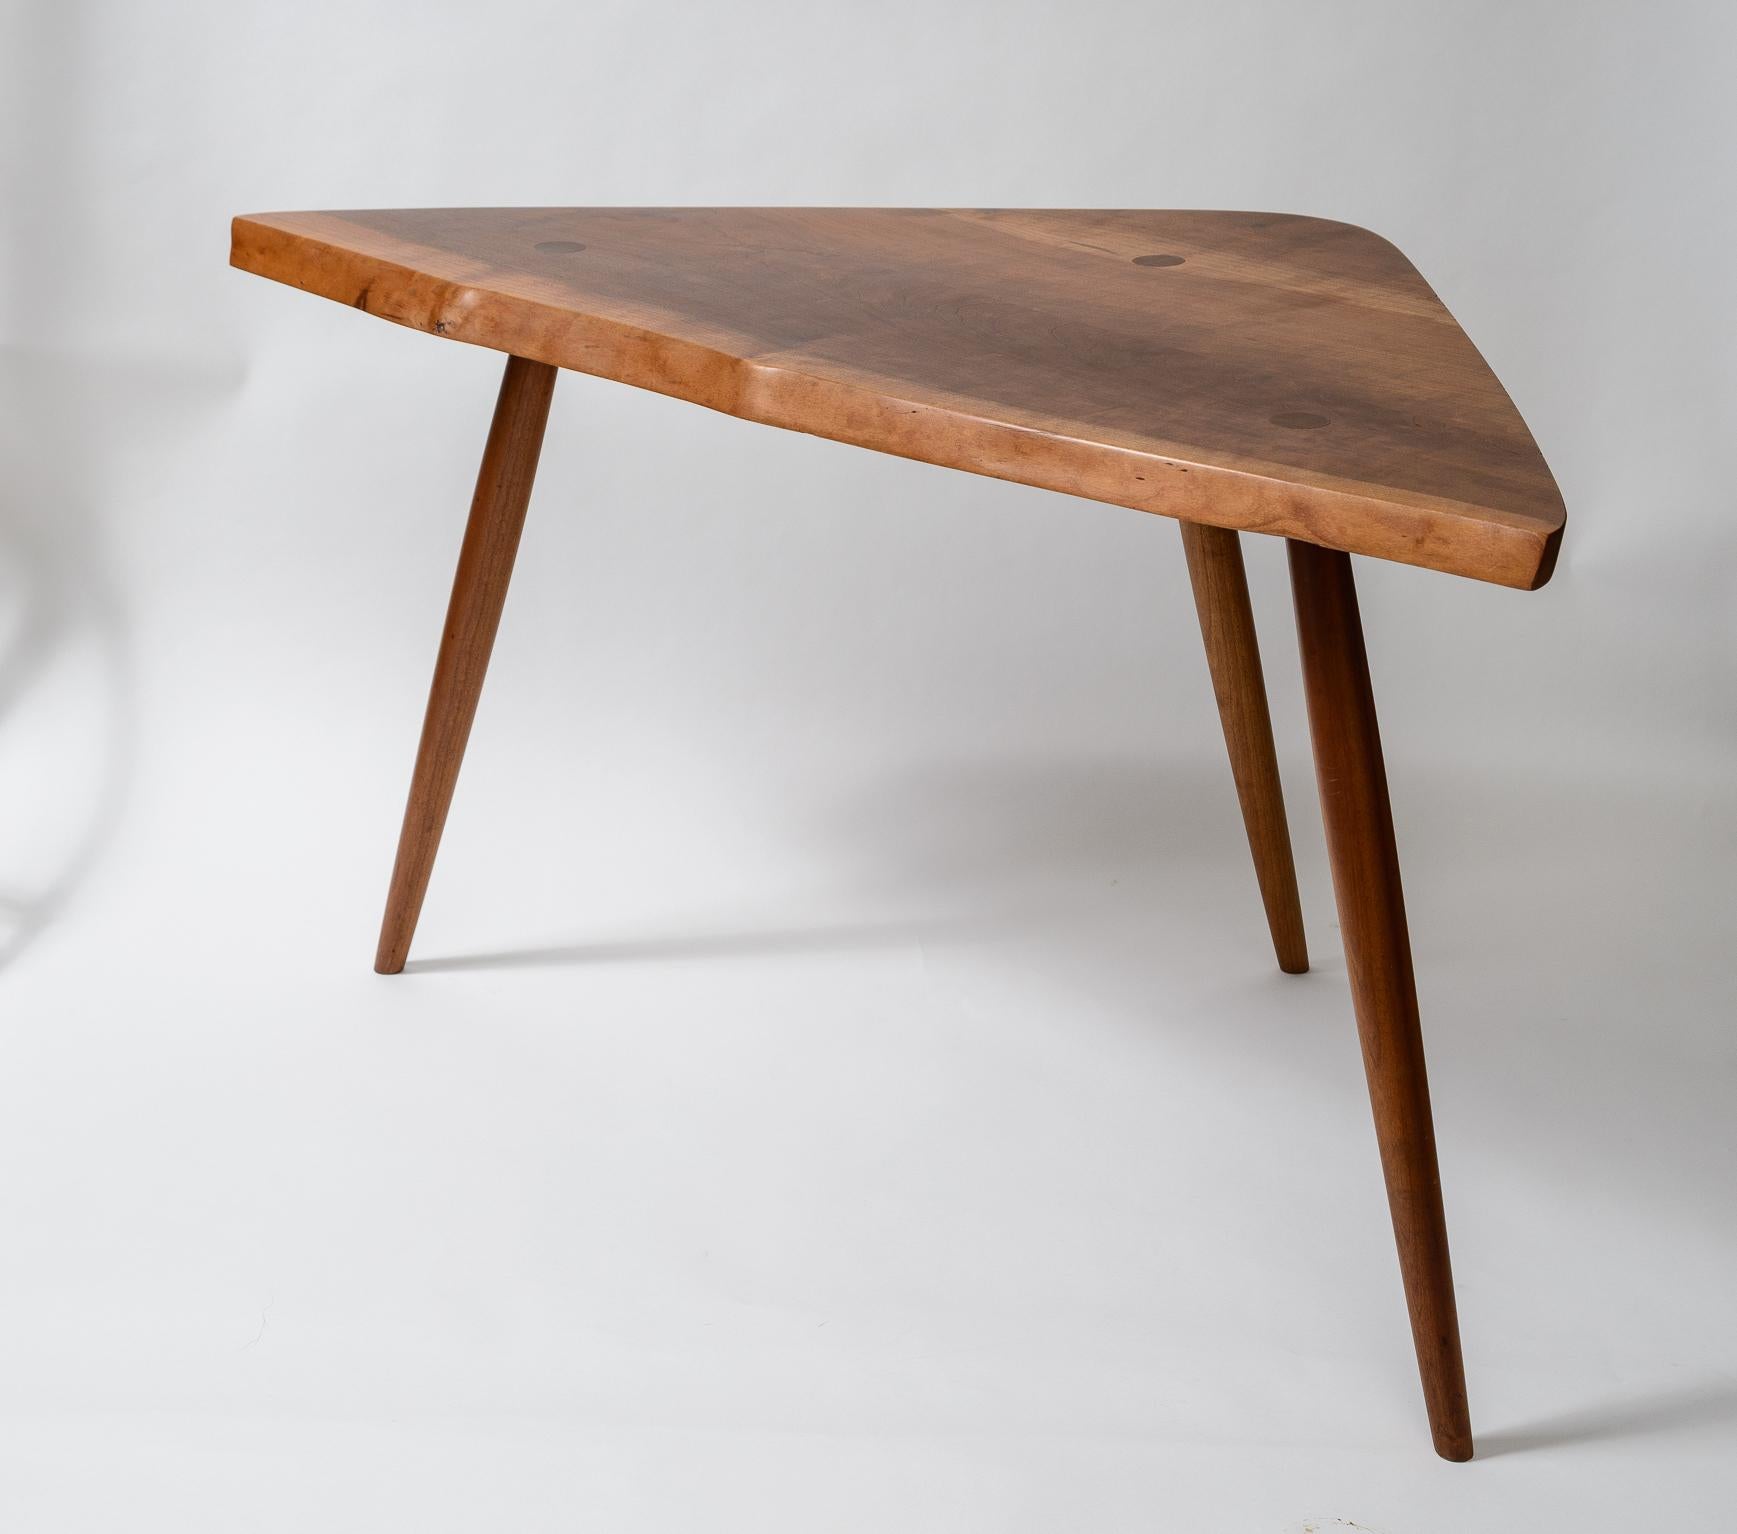 George Nakashima Cherry Wepman Table
Large form with legs posting through the top
Expressive Free edge